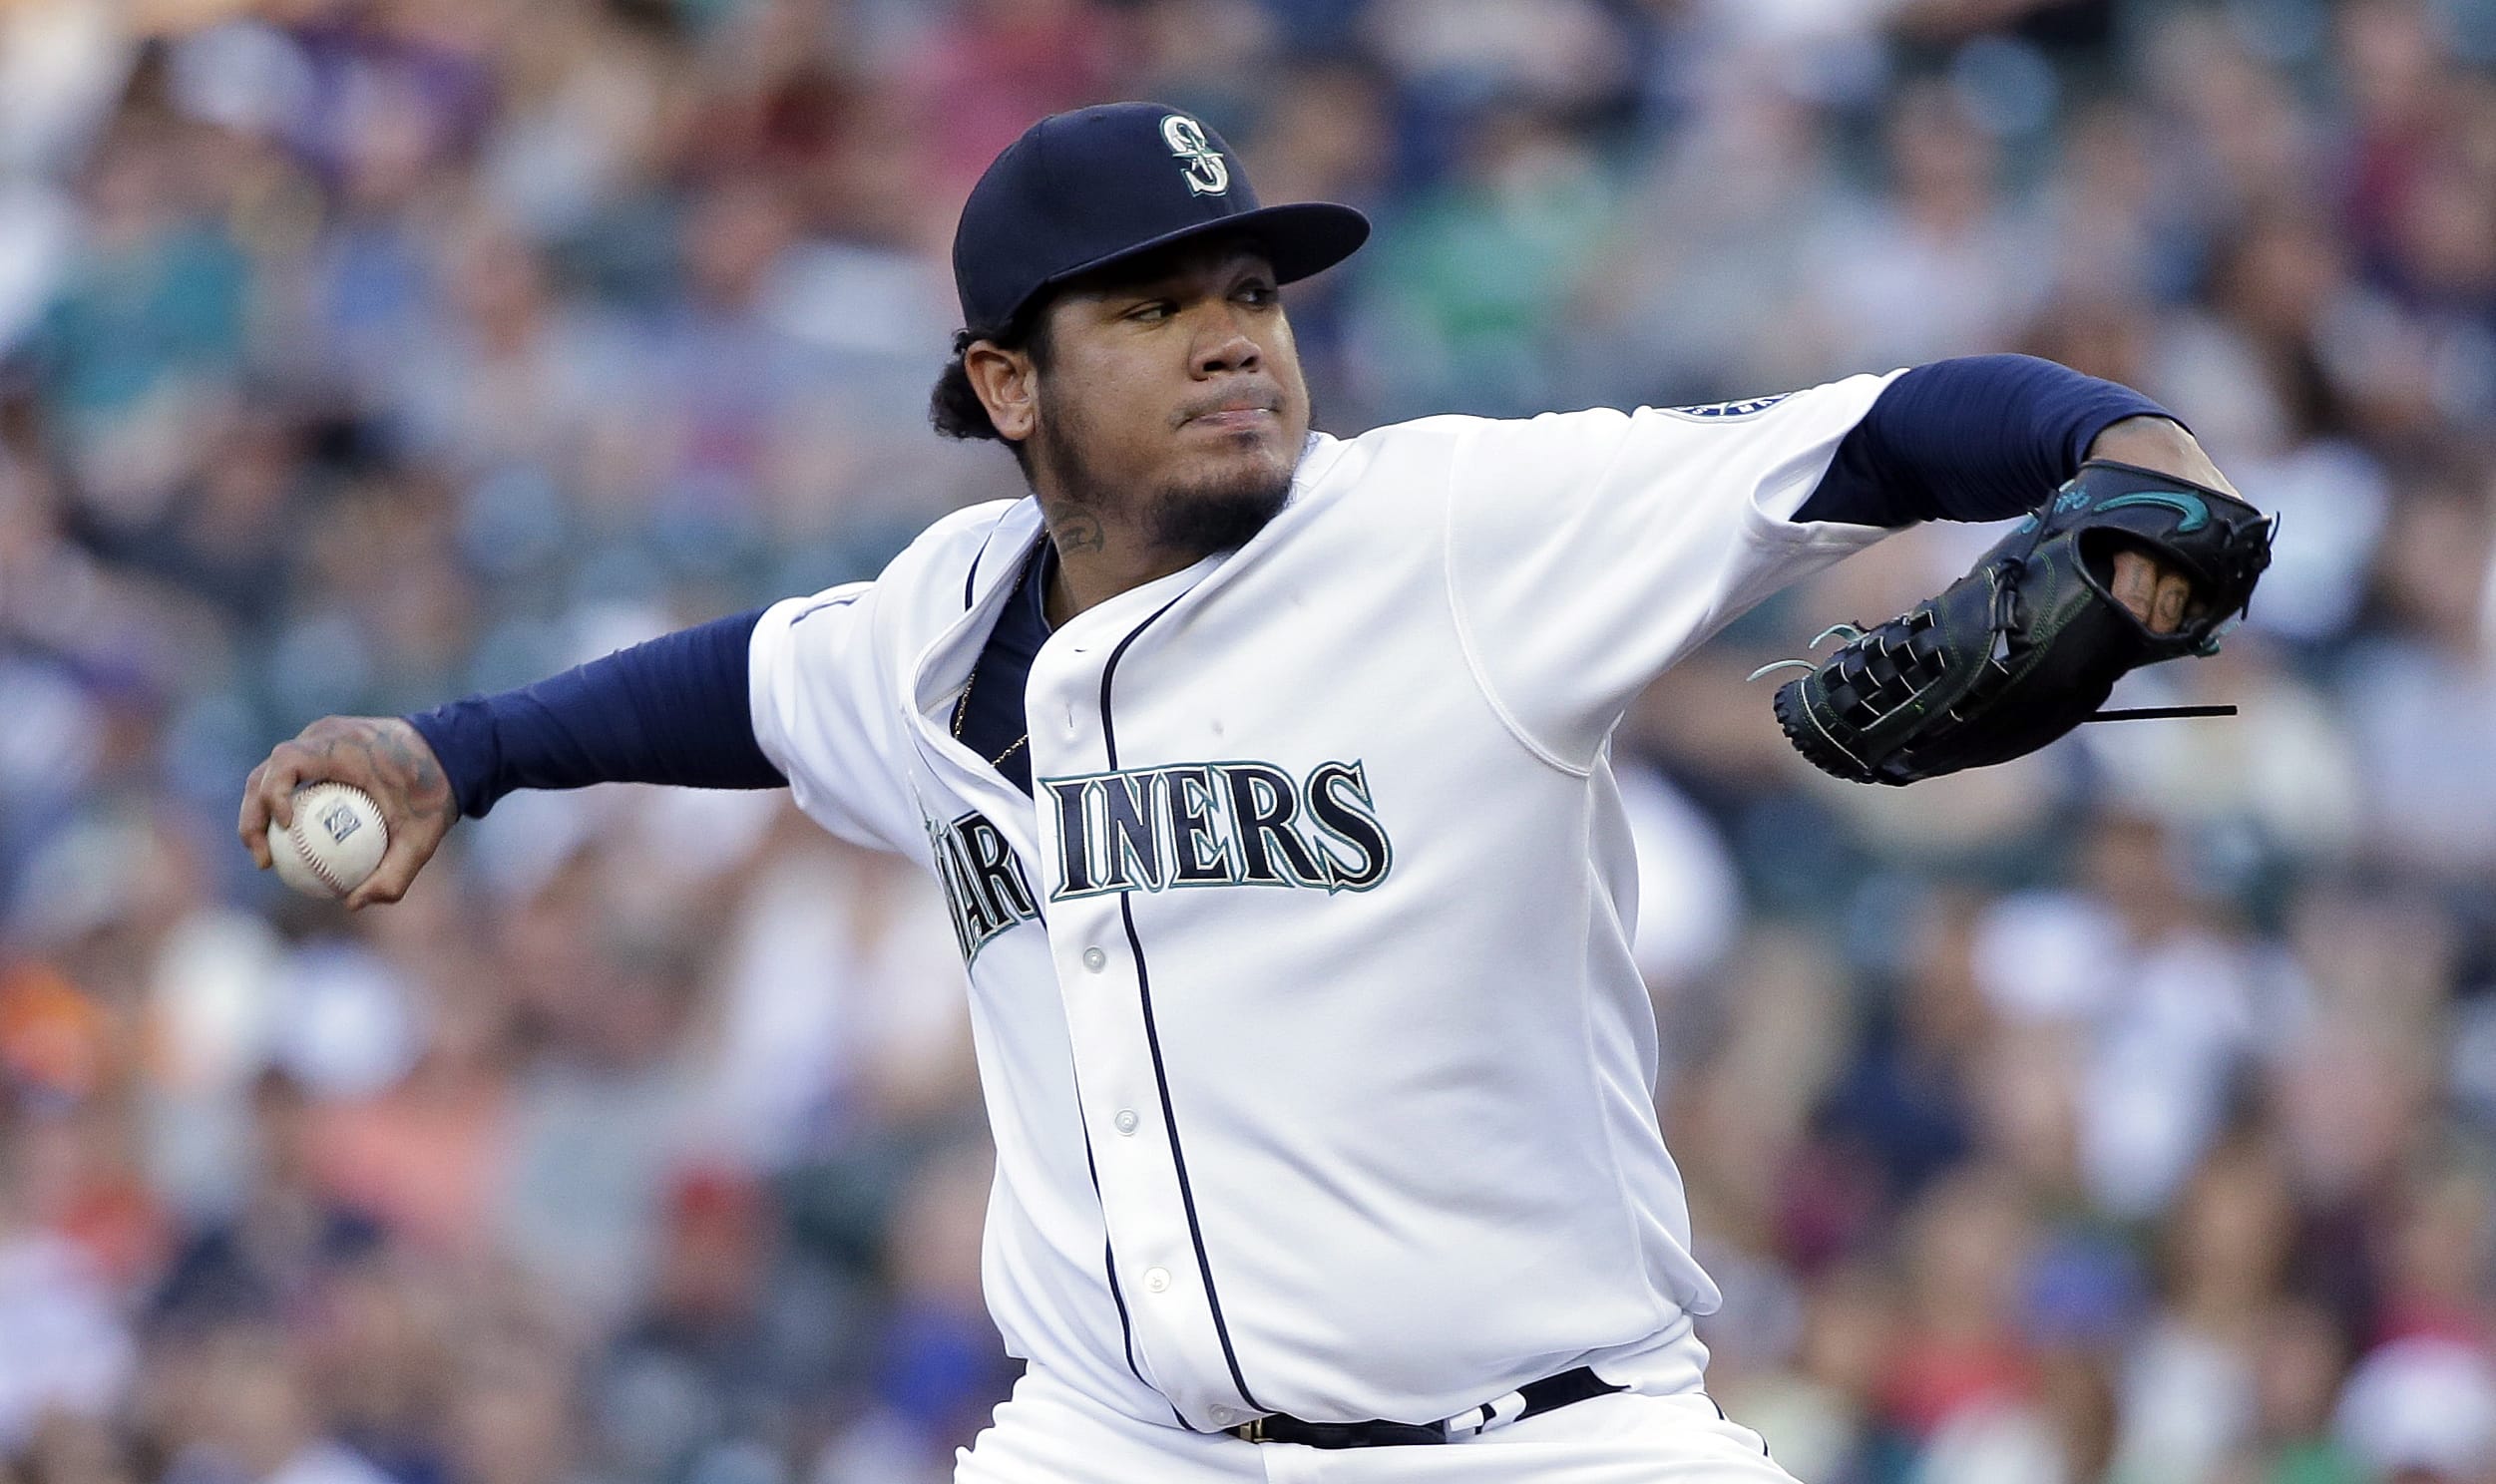 Seattle Mariners starting pitcher Felix Hernandez will make his 10th consecutive and 11th opening day start overall when the Mariners host the Cleveland Indians on Thursday, March 29, 2018.